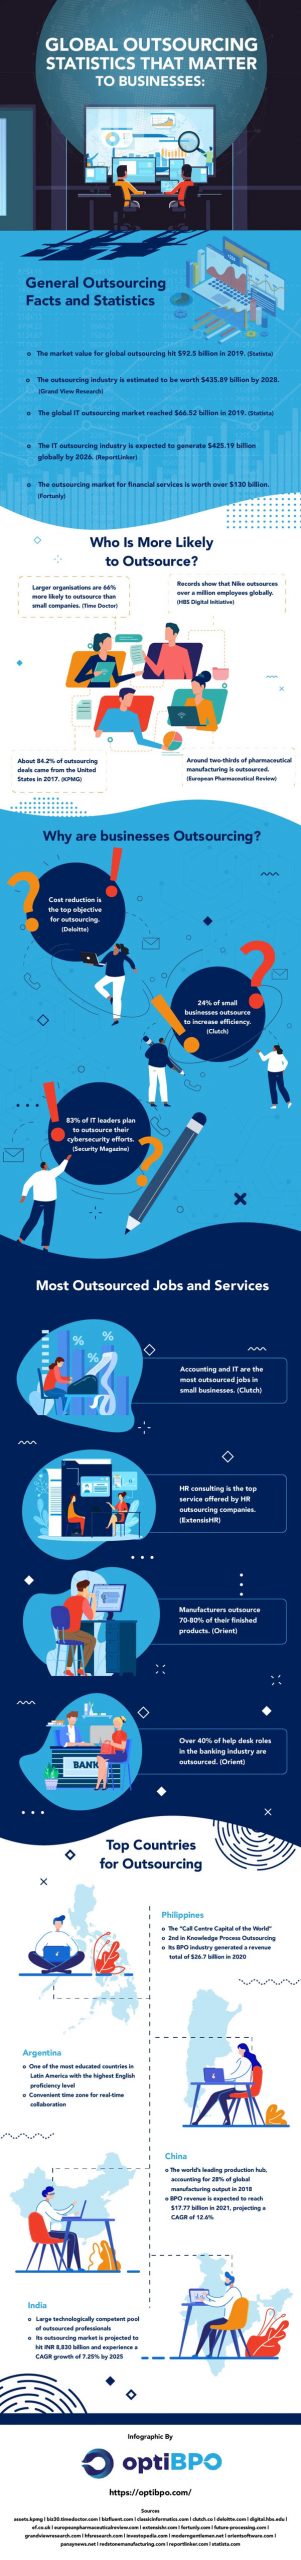 Global Outsourcing Stastics OptiBPO Infographic Info Scaled, Industry Today